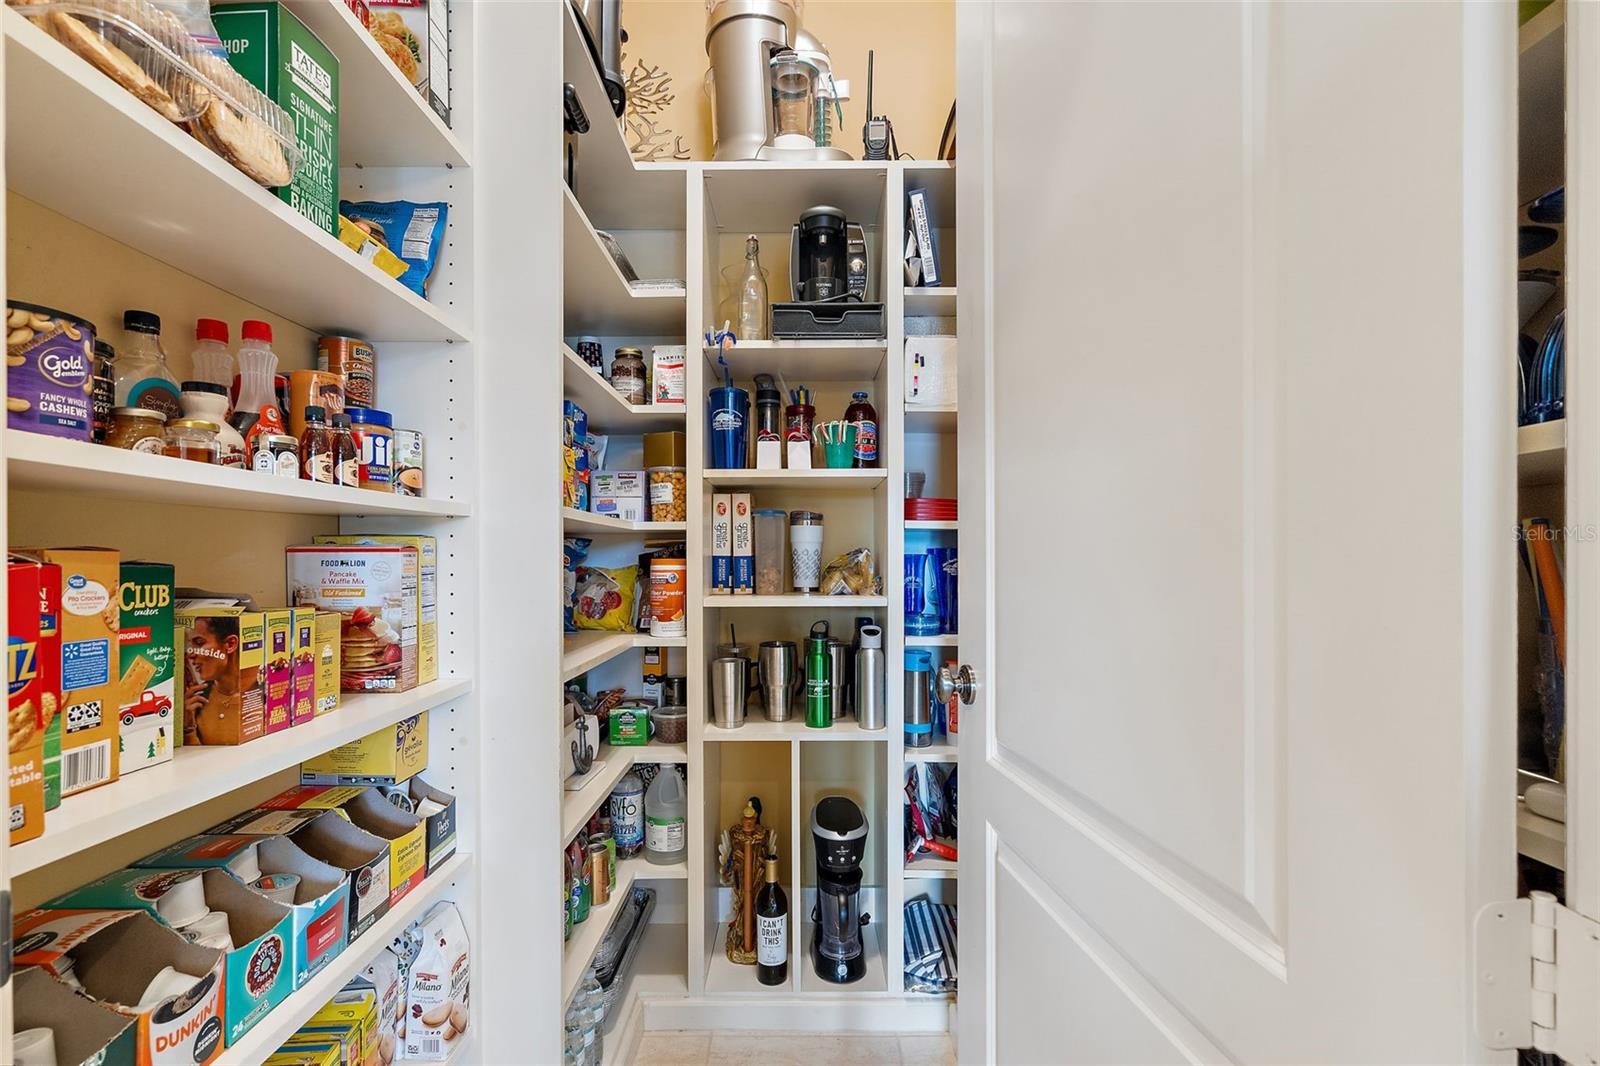 Huge (and well organized!) walk in pantry.